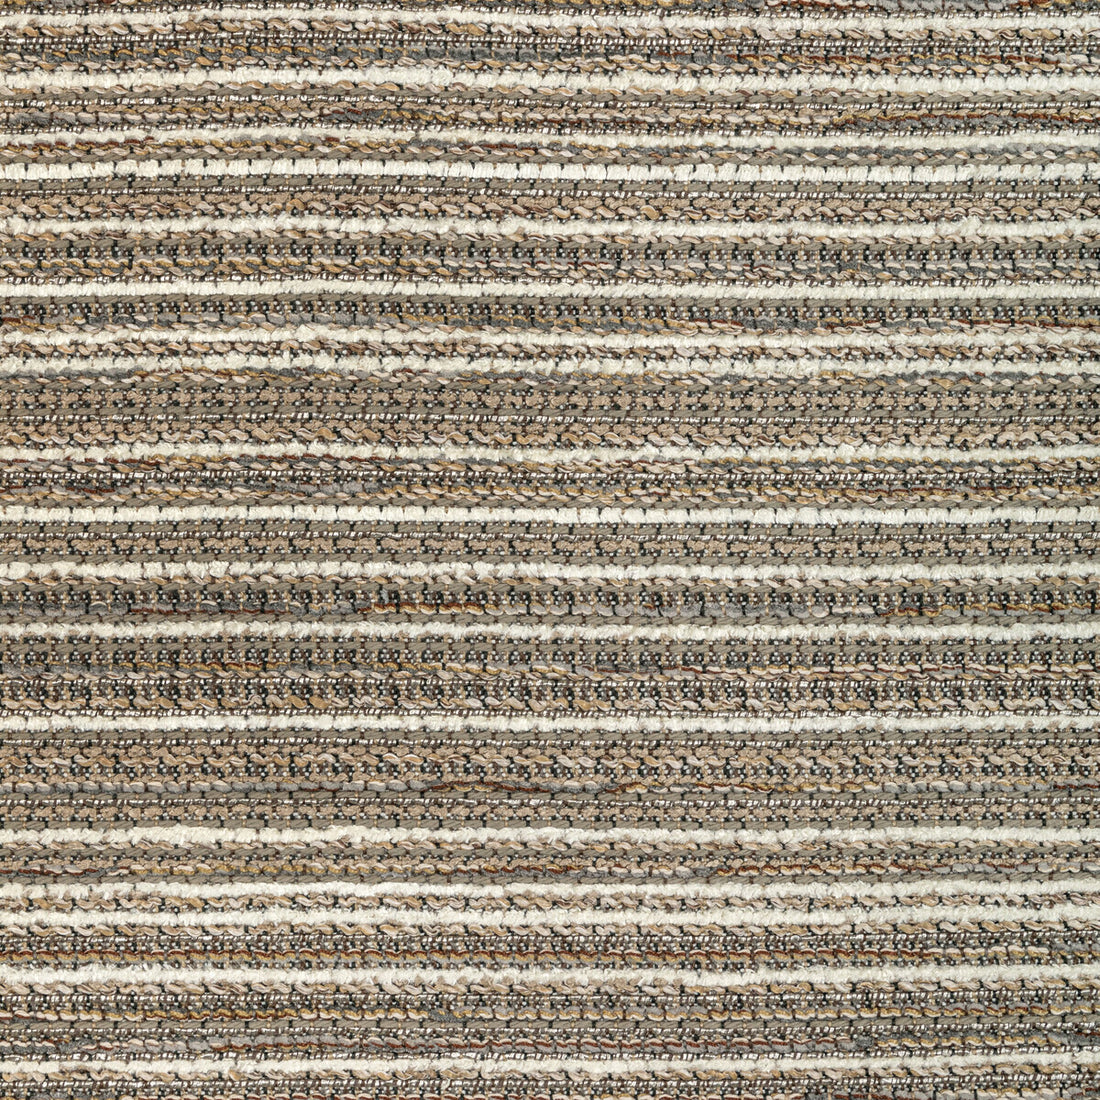 Kravet Design fabric in 36416-611 color - pattern 36416.611.0 - by Kravet Design in the Performance Crypton Home collection